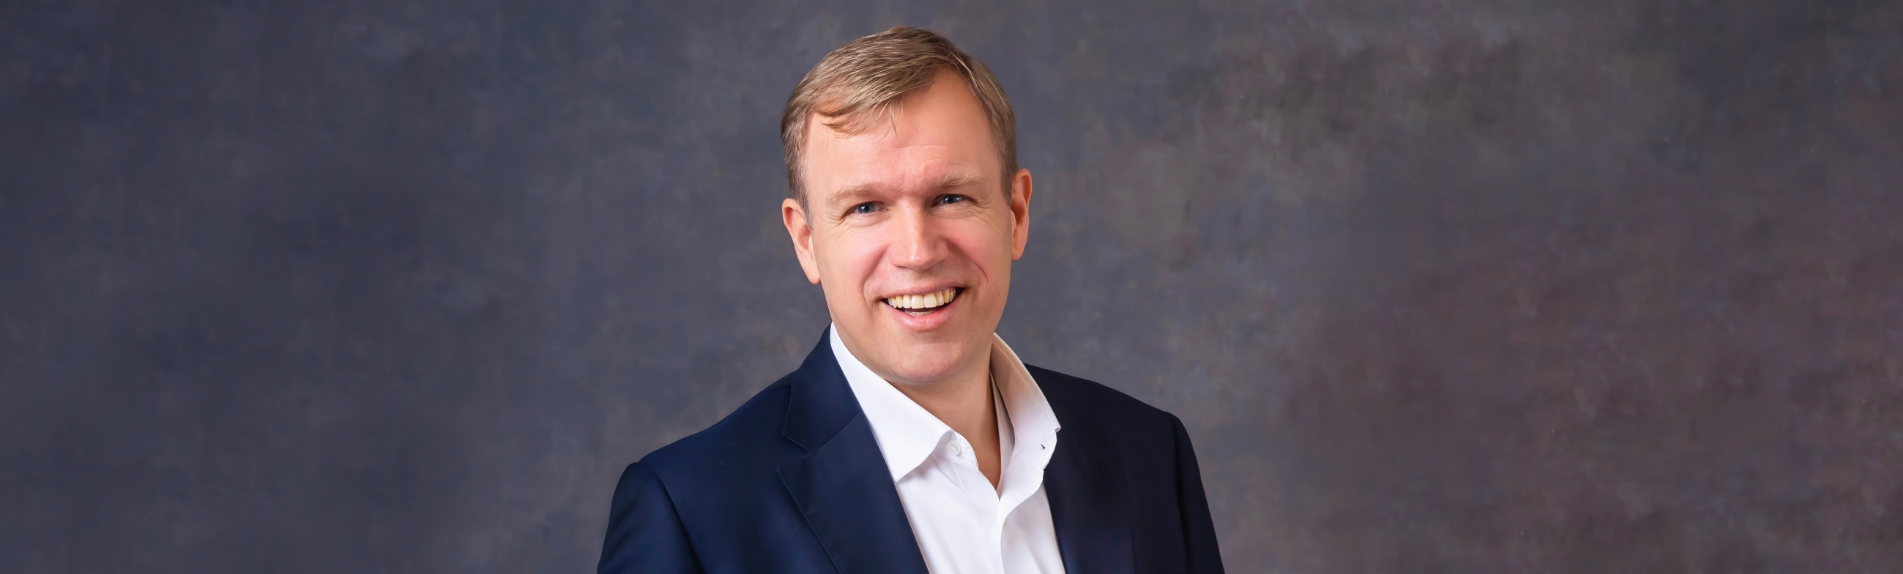 Pieter Kraan becomes MD of Singapore and Australia as Leaseweb grows